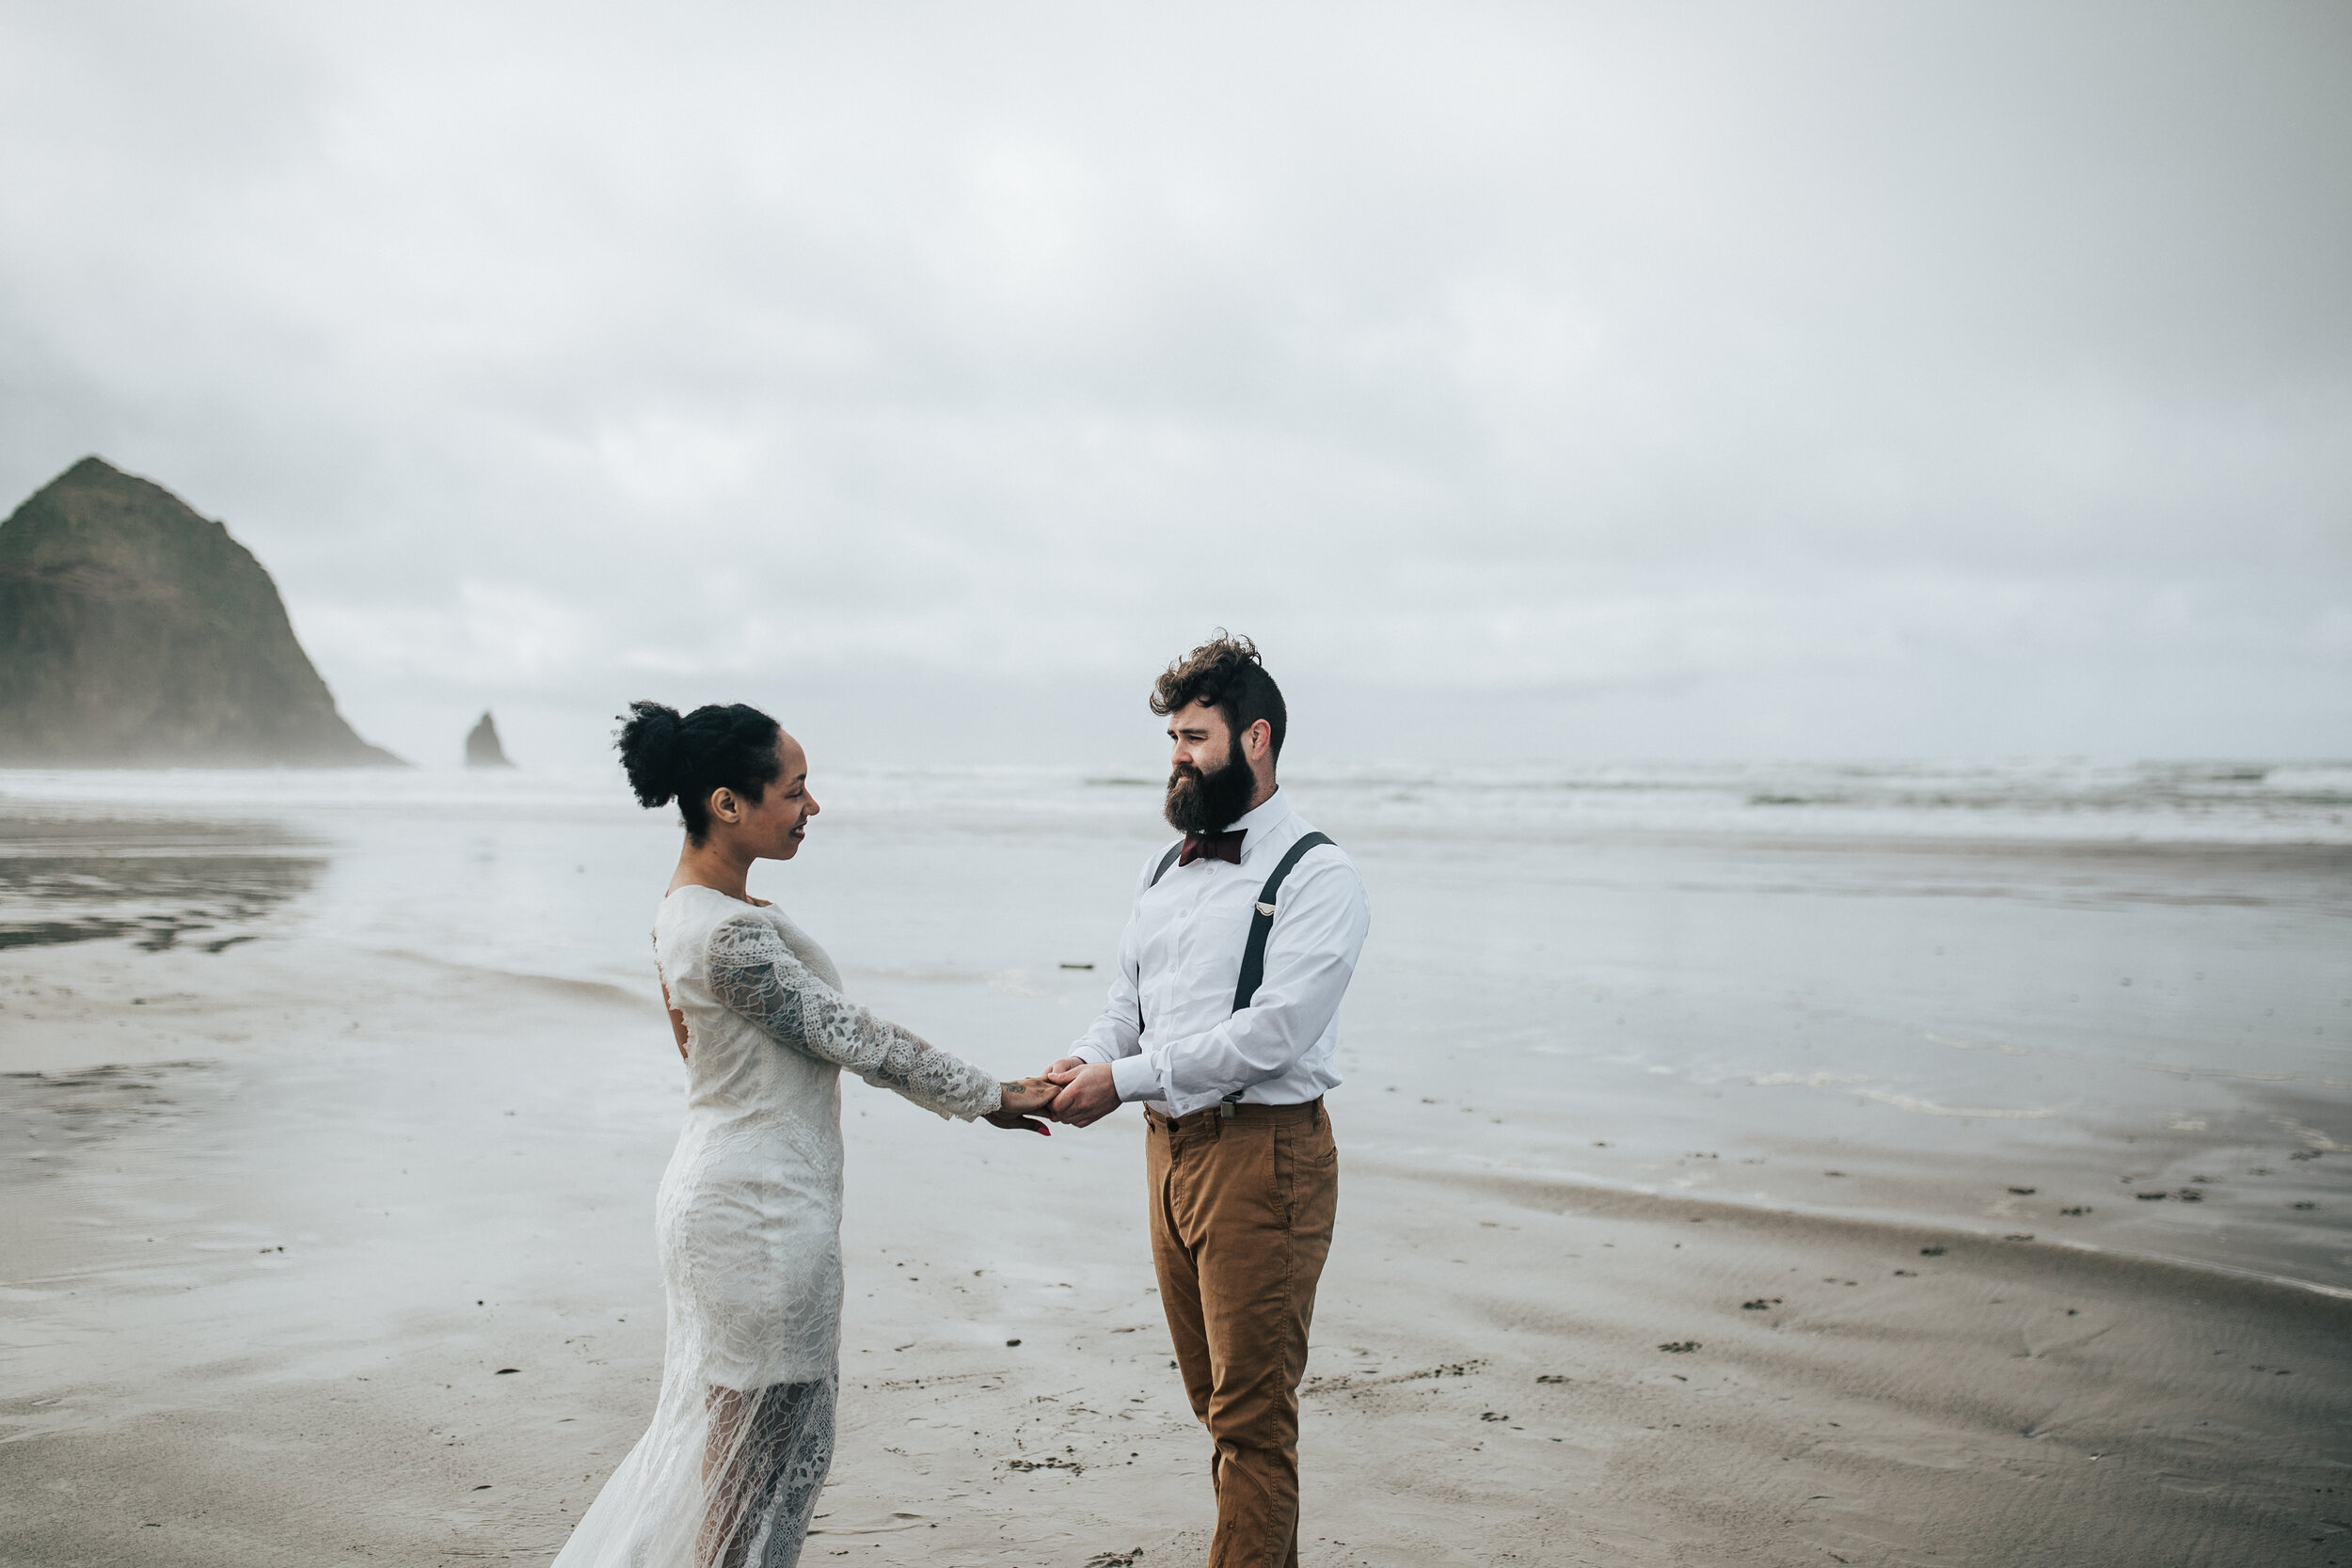  Eloping on the Oregon coast with keyhole back wedding dress. Man and woman say vows to each other at Cannon Beach, Oregon walk along the beach Oregon coast elopement photographer for adventurous couple #EmilyJenkinsPhotography #cannonbeach #elopemen